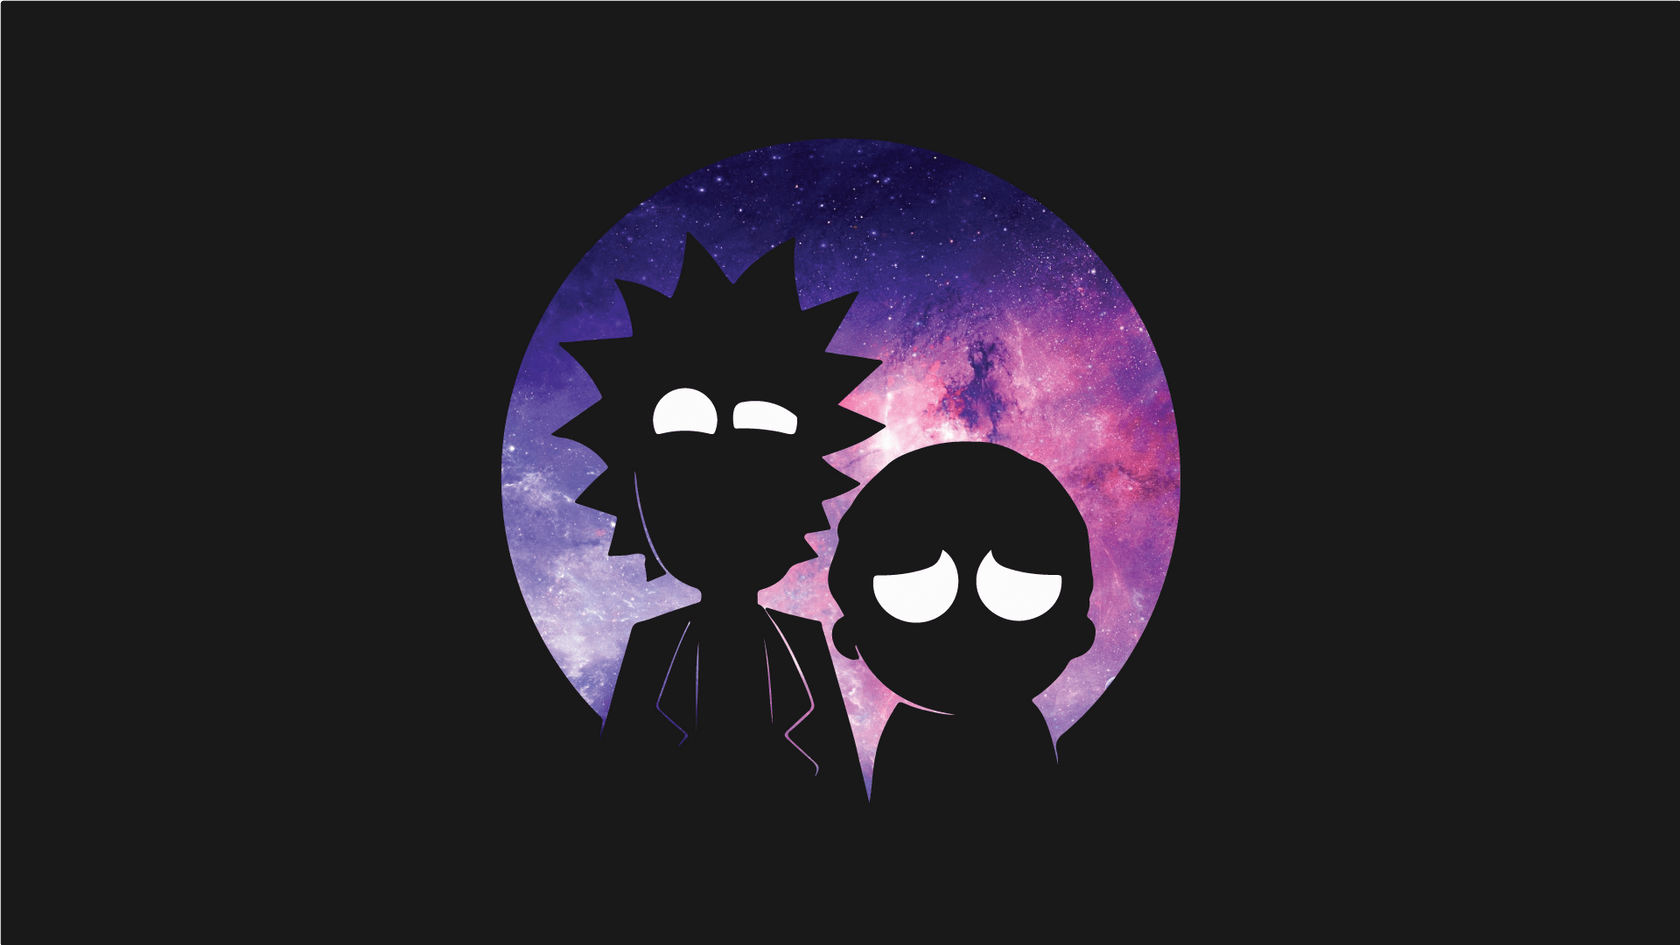 Rick and Morty Desktop Wallpapers - Top Free Rick and Morty Desktop